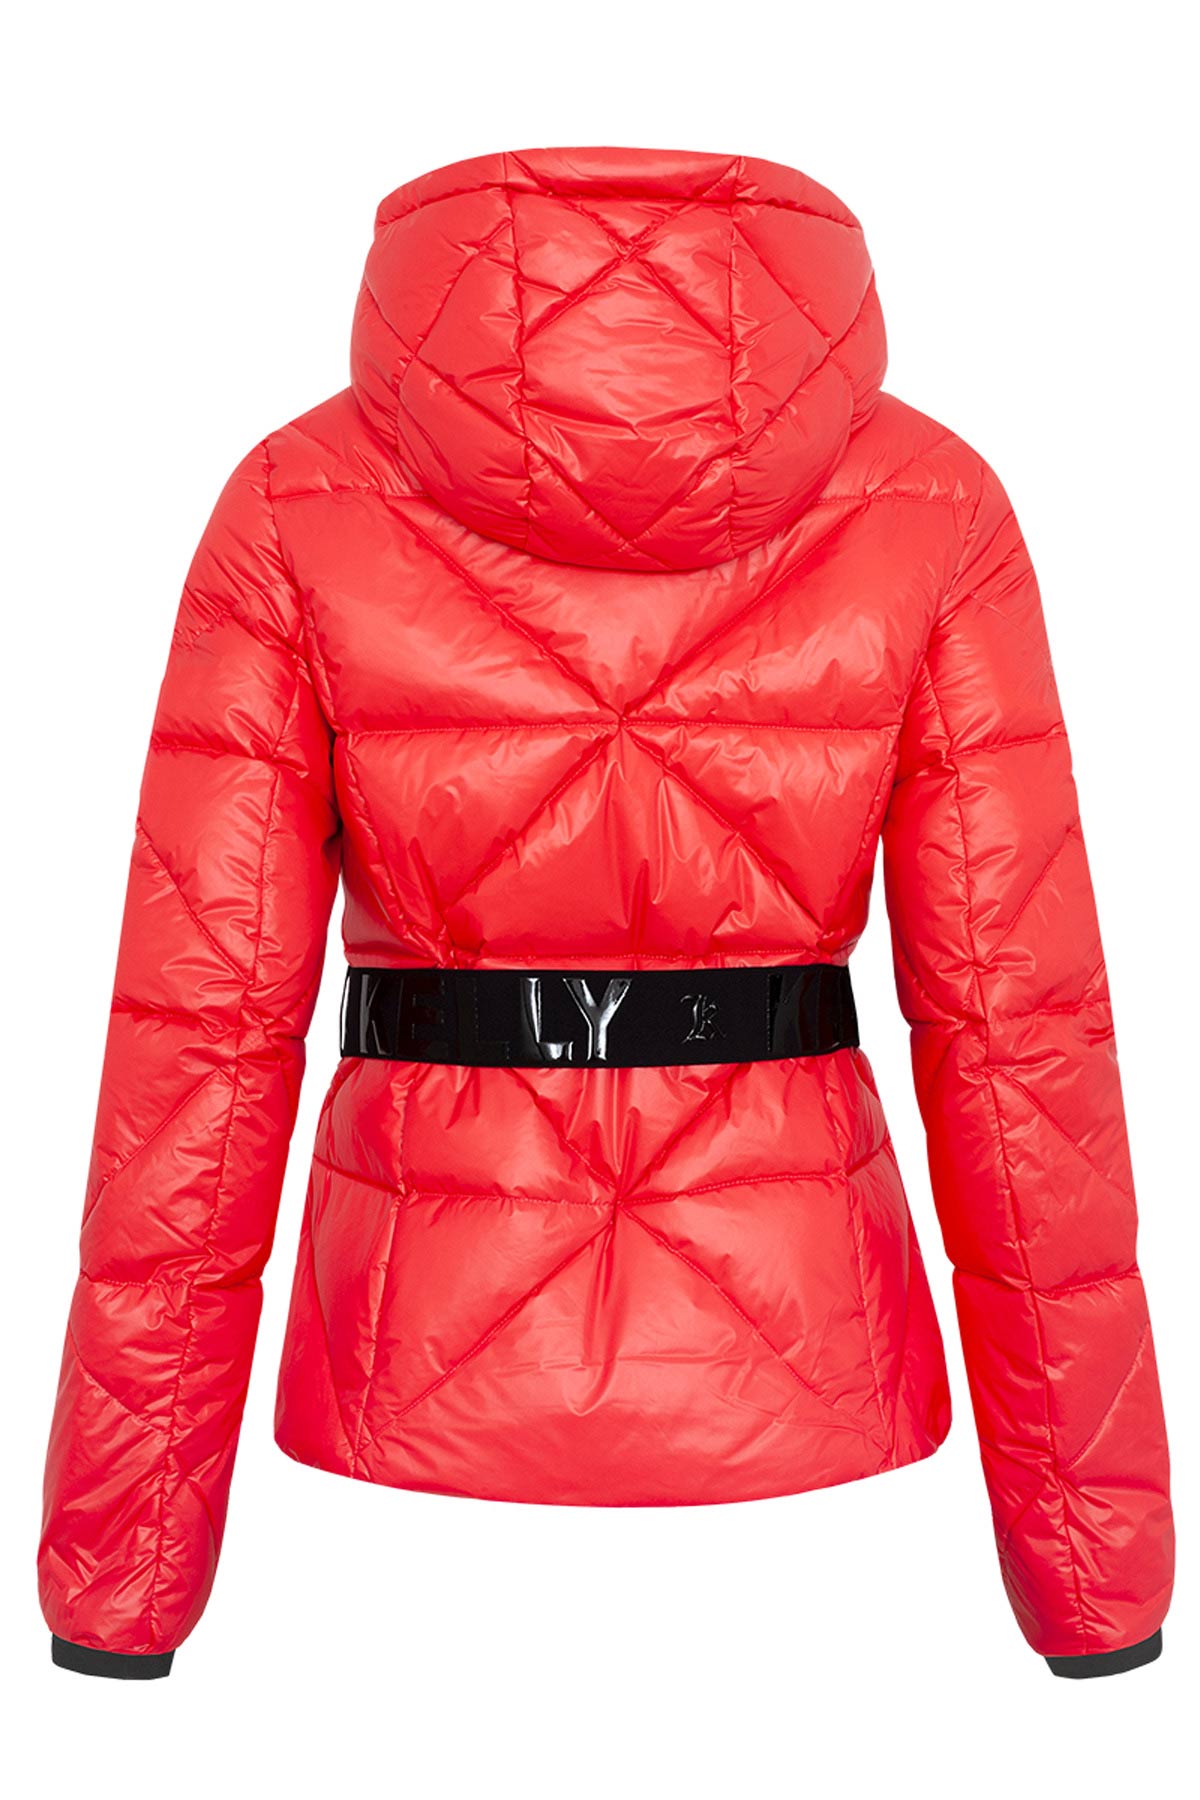 Kelly Eden Red Downfilled Ski Jacket with Belt and Hood